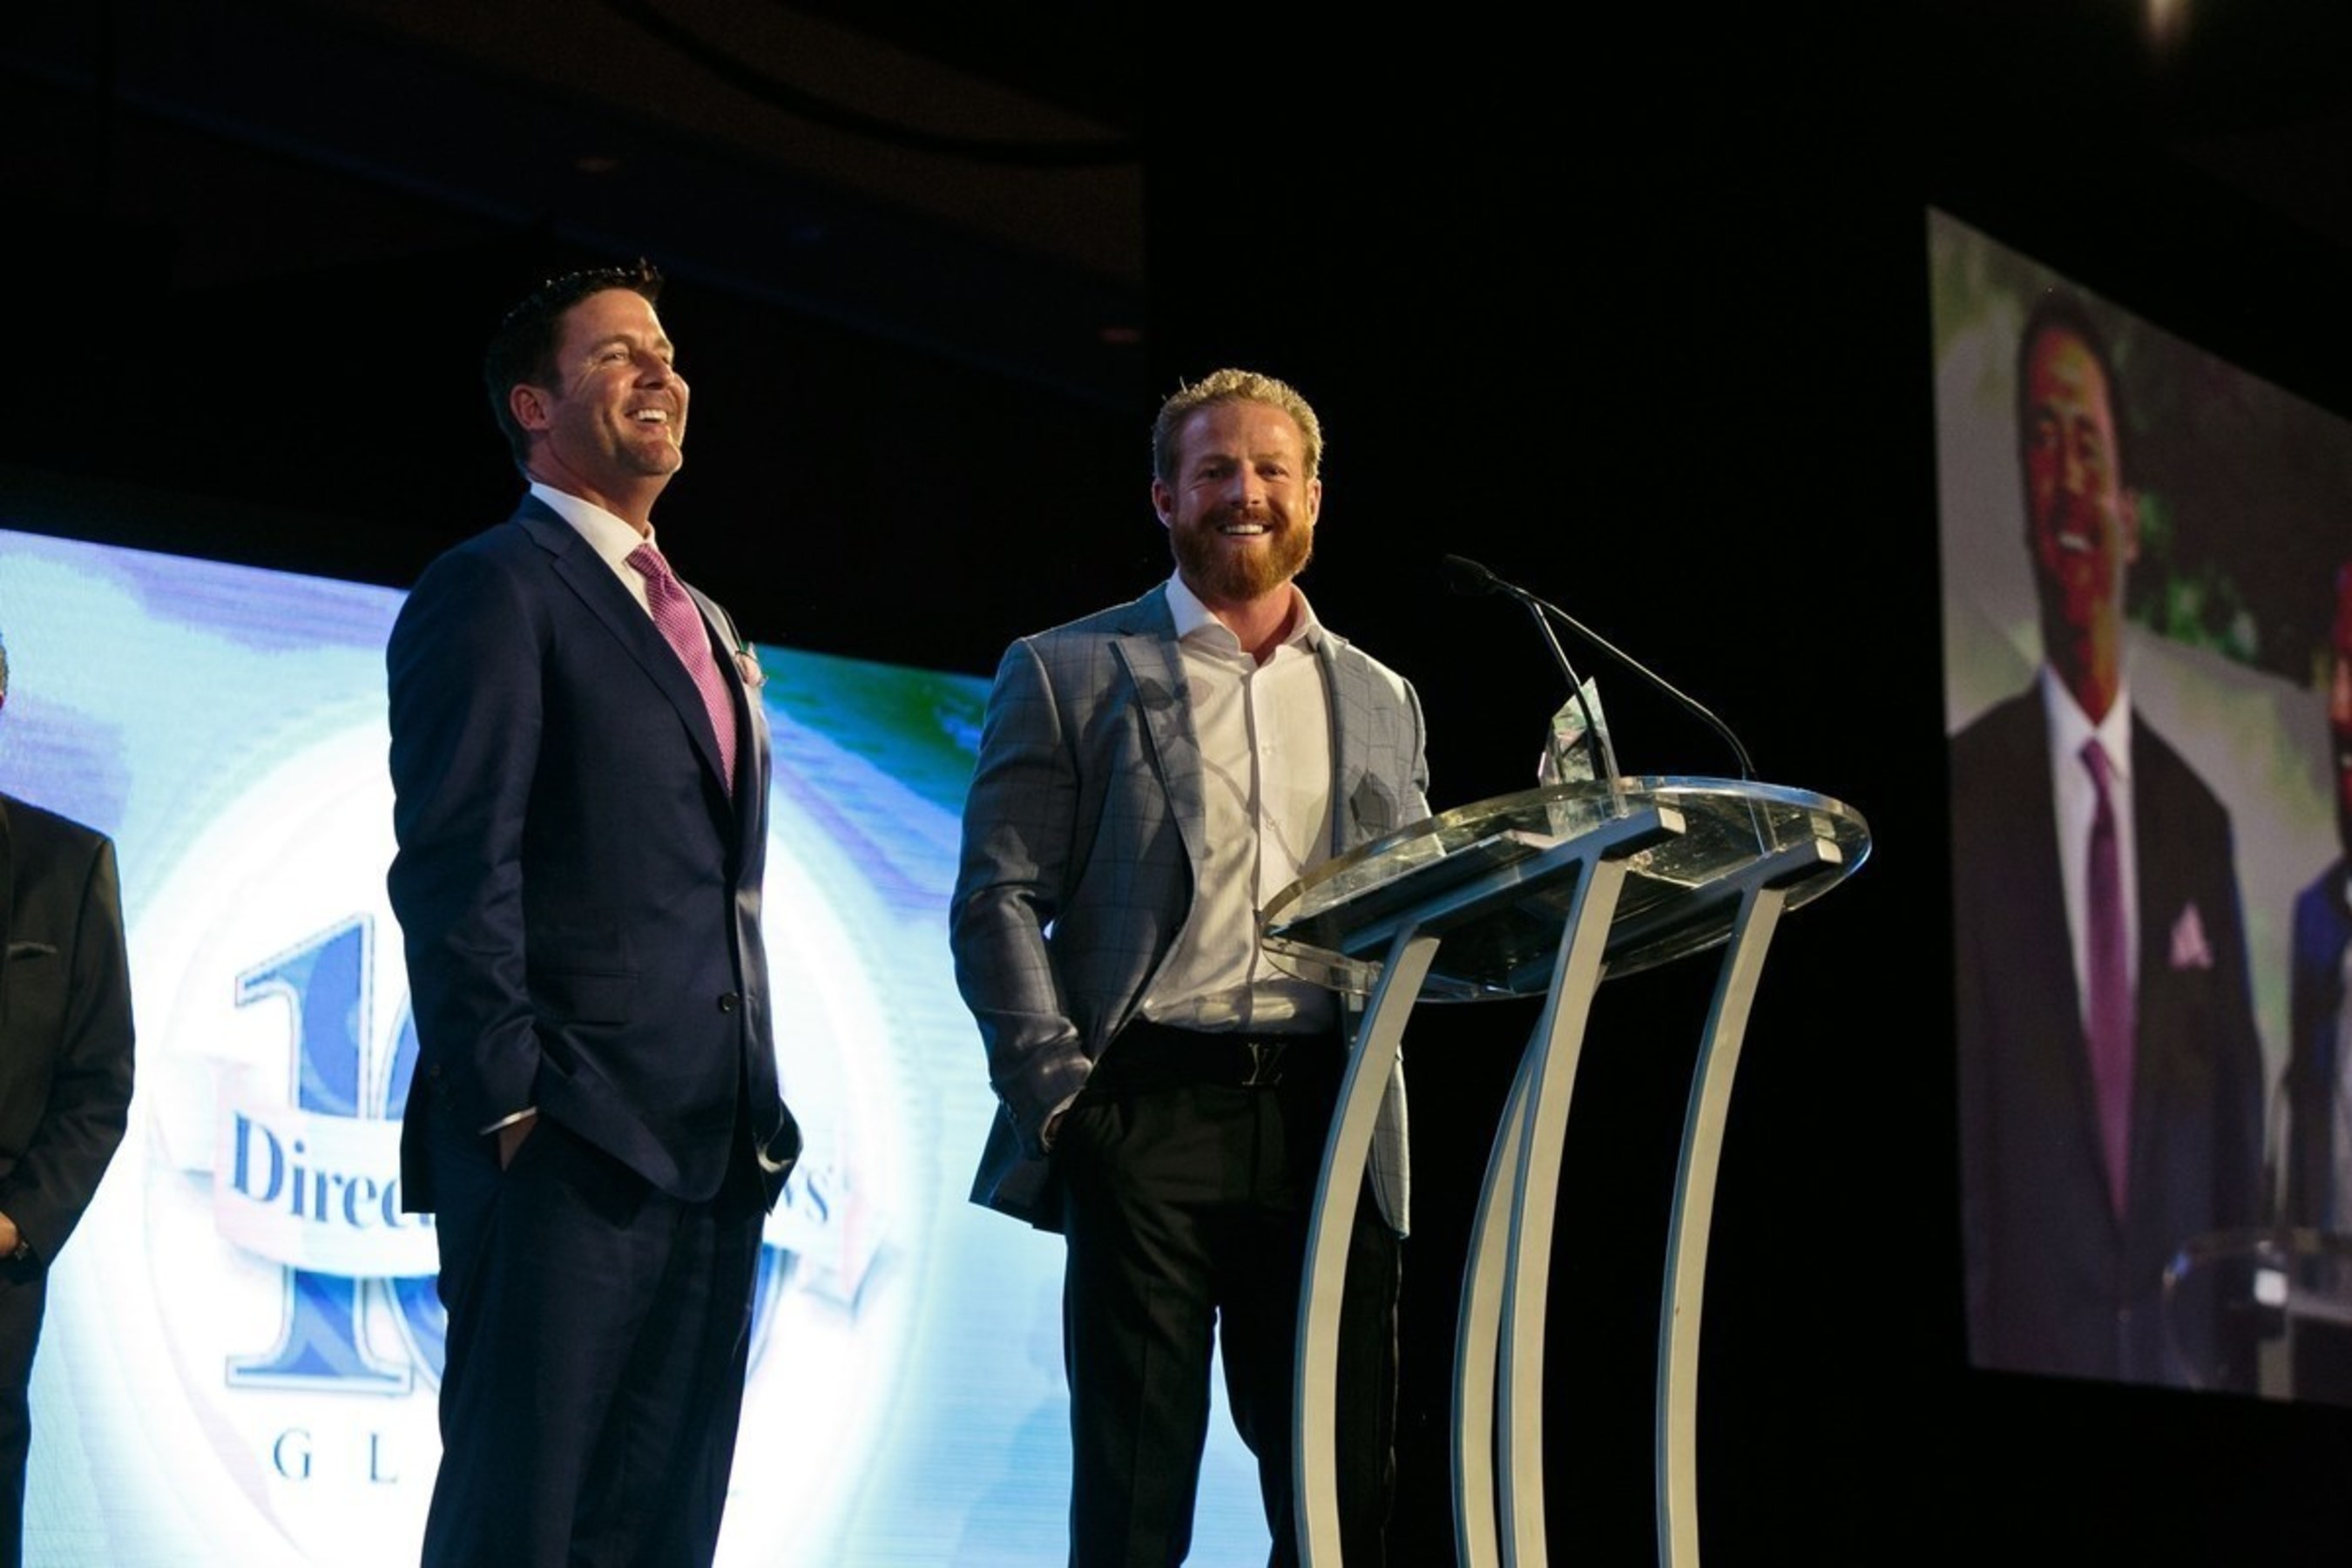 Le-Vel Co-CEOs, Co-Founders and Co-Owners Paul Gravette and Jason Camper accept the 2016 Bravo Growth Award during the DSN Global 100 Celebration, sponsored by SUCCESS Partners and held April 7 at Dallas' Omni Hotel.